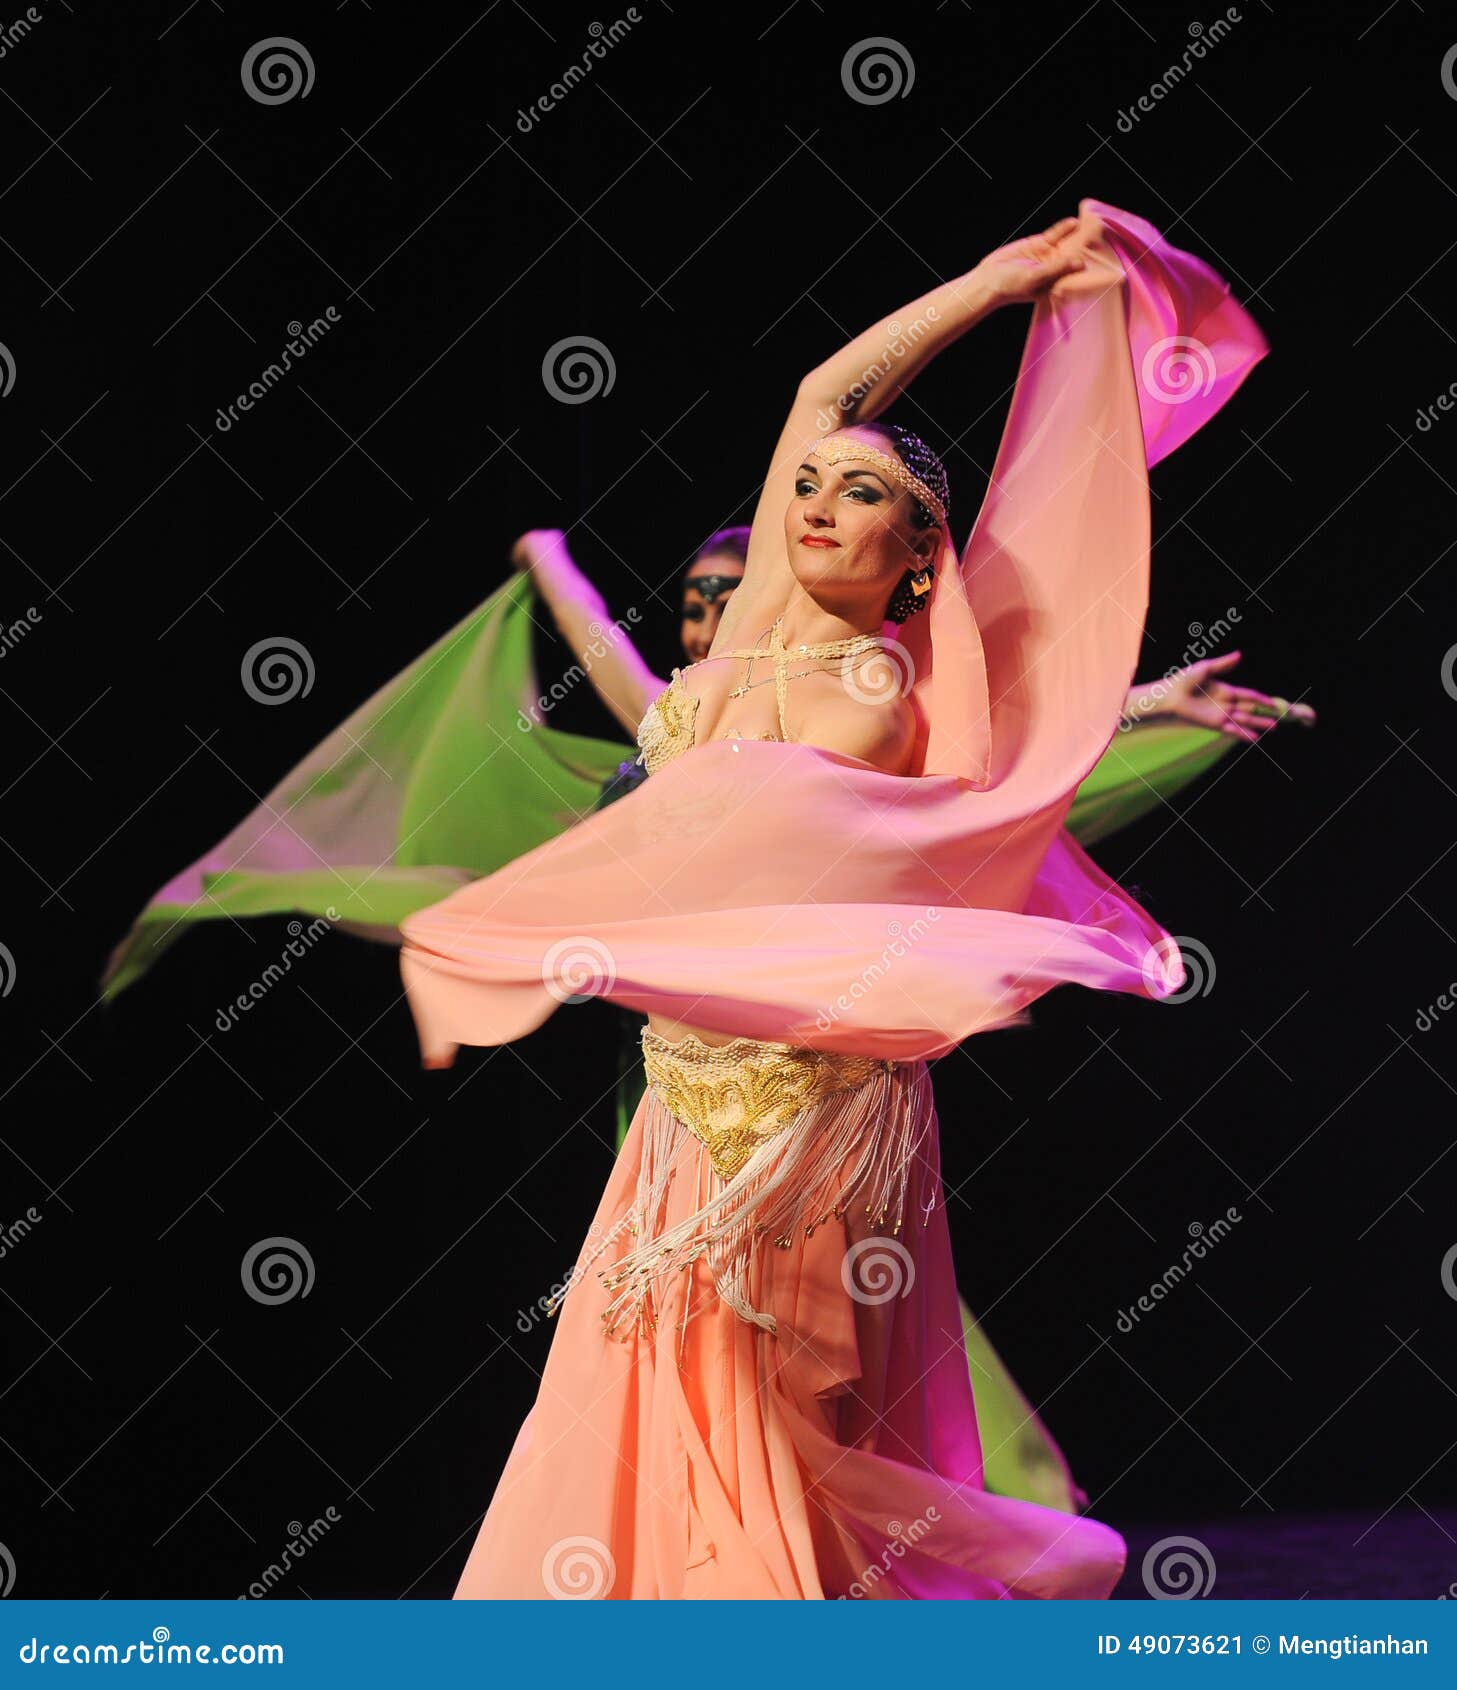 Indian babe dances an passionate dance in Oriental traditions